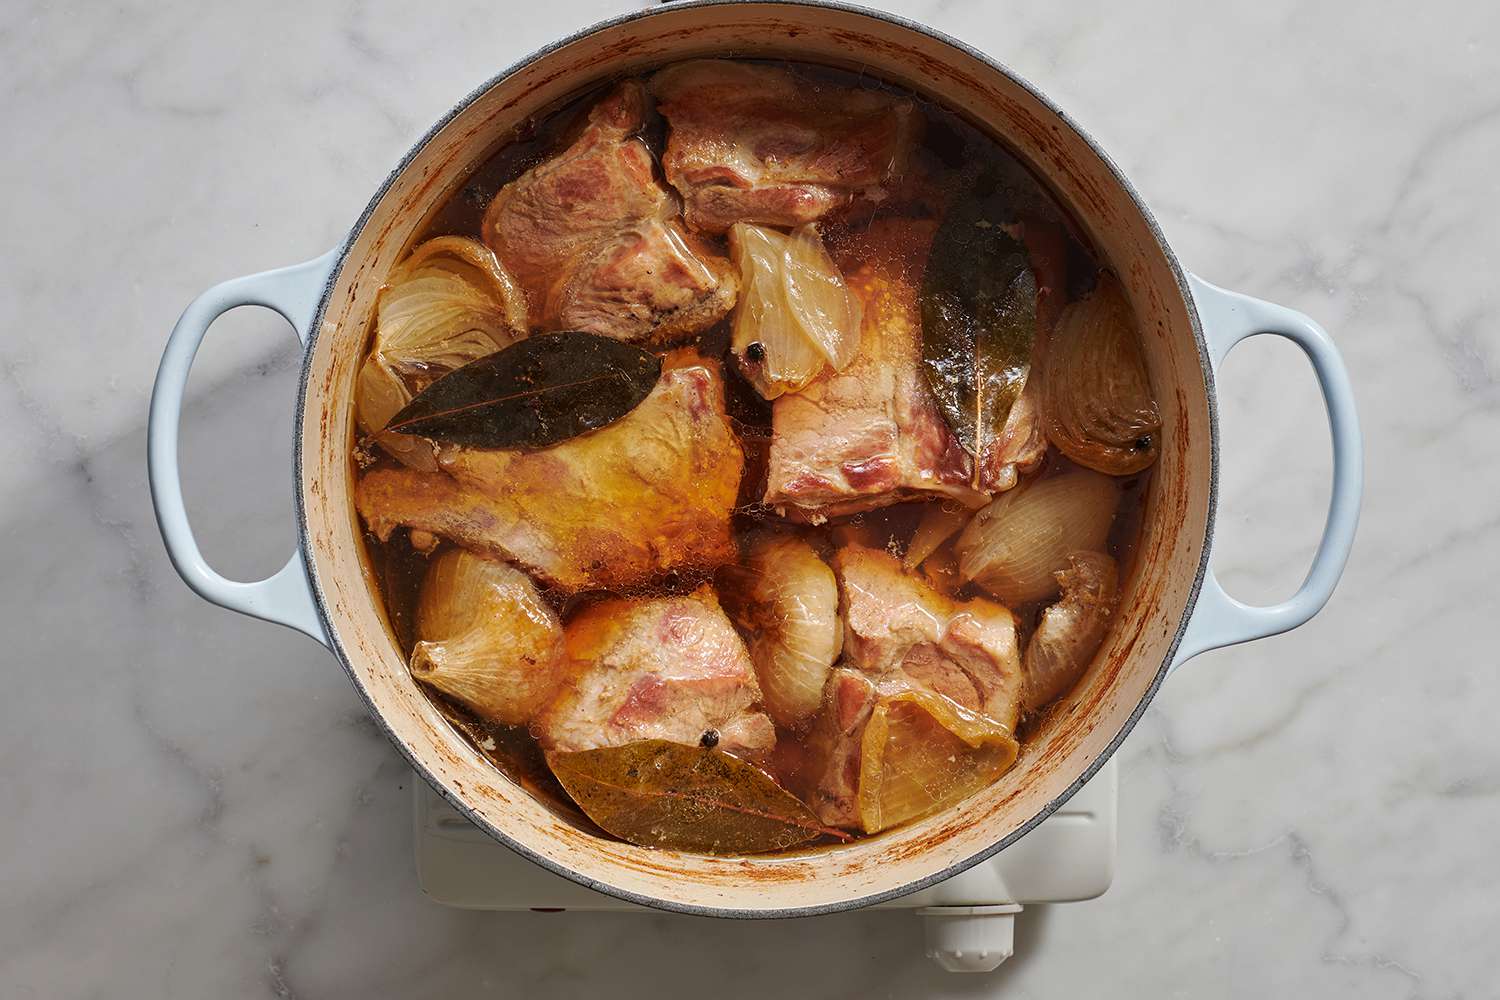 Pork meat and bones cooking in broth 